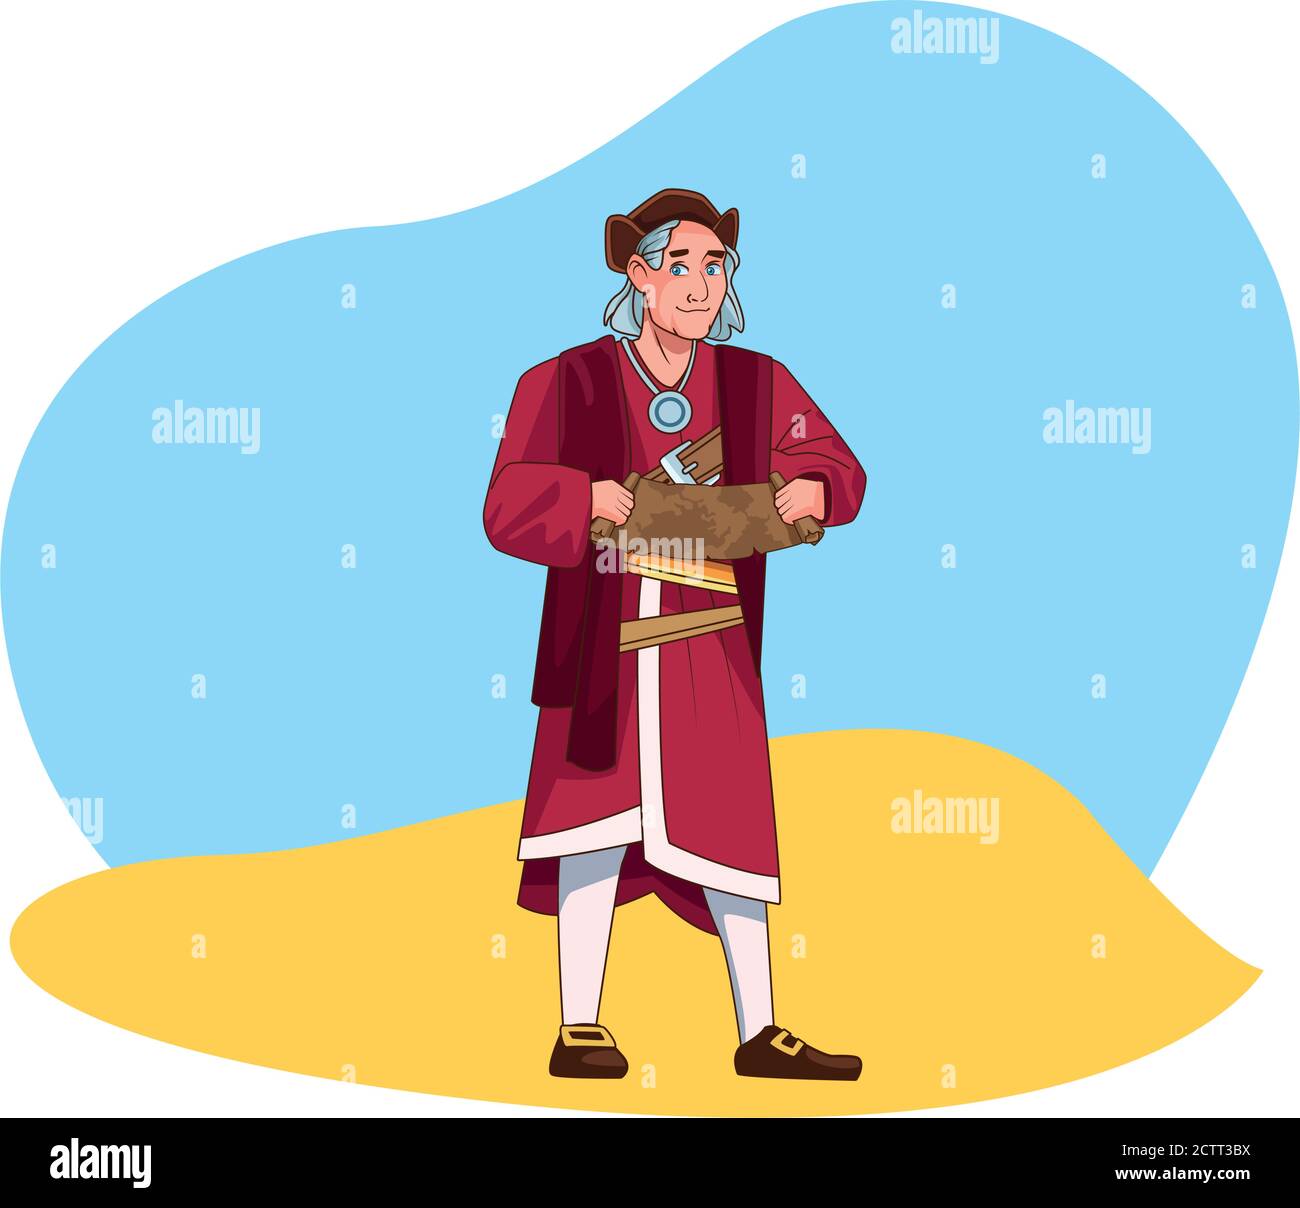 Christopher Columbus with paper map character vector illustration design Stock Vector